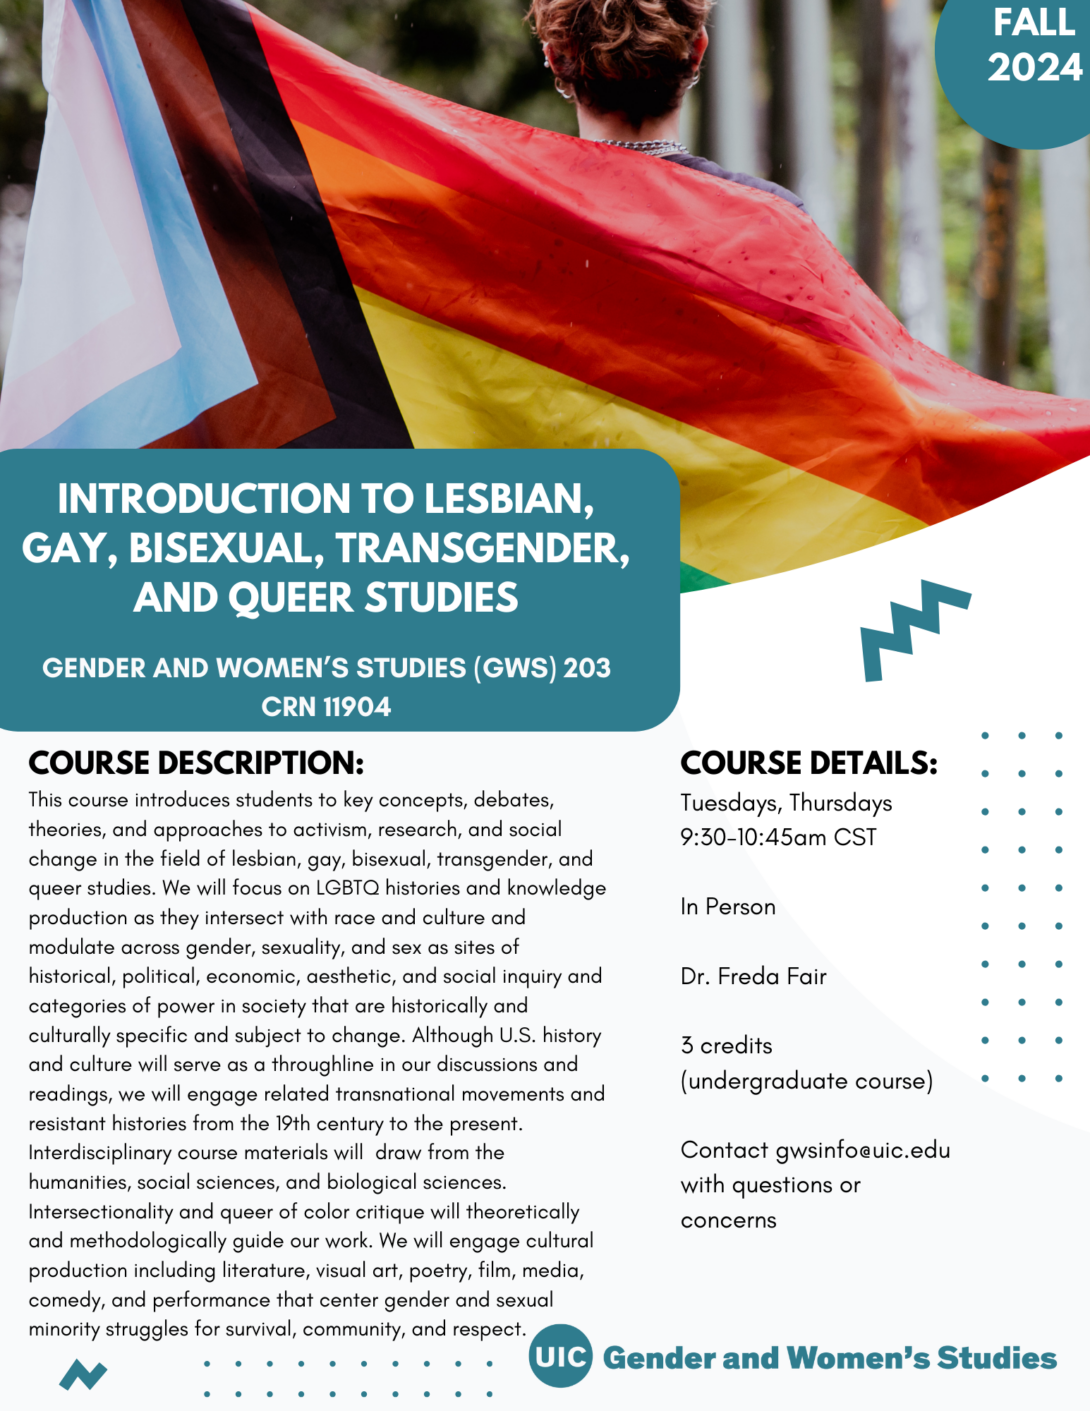 A flyer promoting the fall 2024 Introduction to Lesbian, Gay, Bisexual, Transgender, and Queer Studies course. The top portion of the flyer includes a photo of a person, with their back to the camera, holding an outstretched LGBTQ pride flag. In the top right corner is a teal circle with Fall 2024 inside it in white text. The bottom left portion of the photo is covered with a teal block that includes the course title in white text. Below that is the course description and course details in black text on a white background. A teal GWS logo appears in the bottom right of the flyer. Parallel lines of teal dots and teal geometric designs decorate the page.